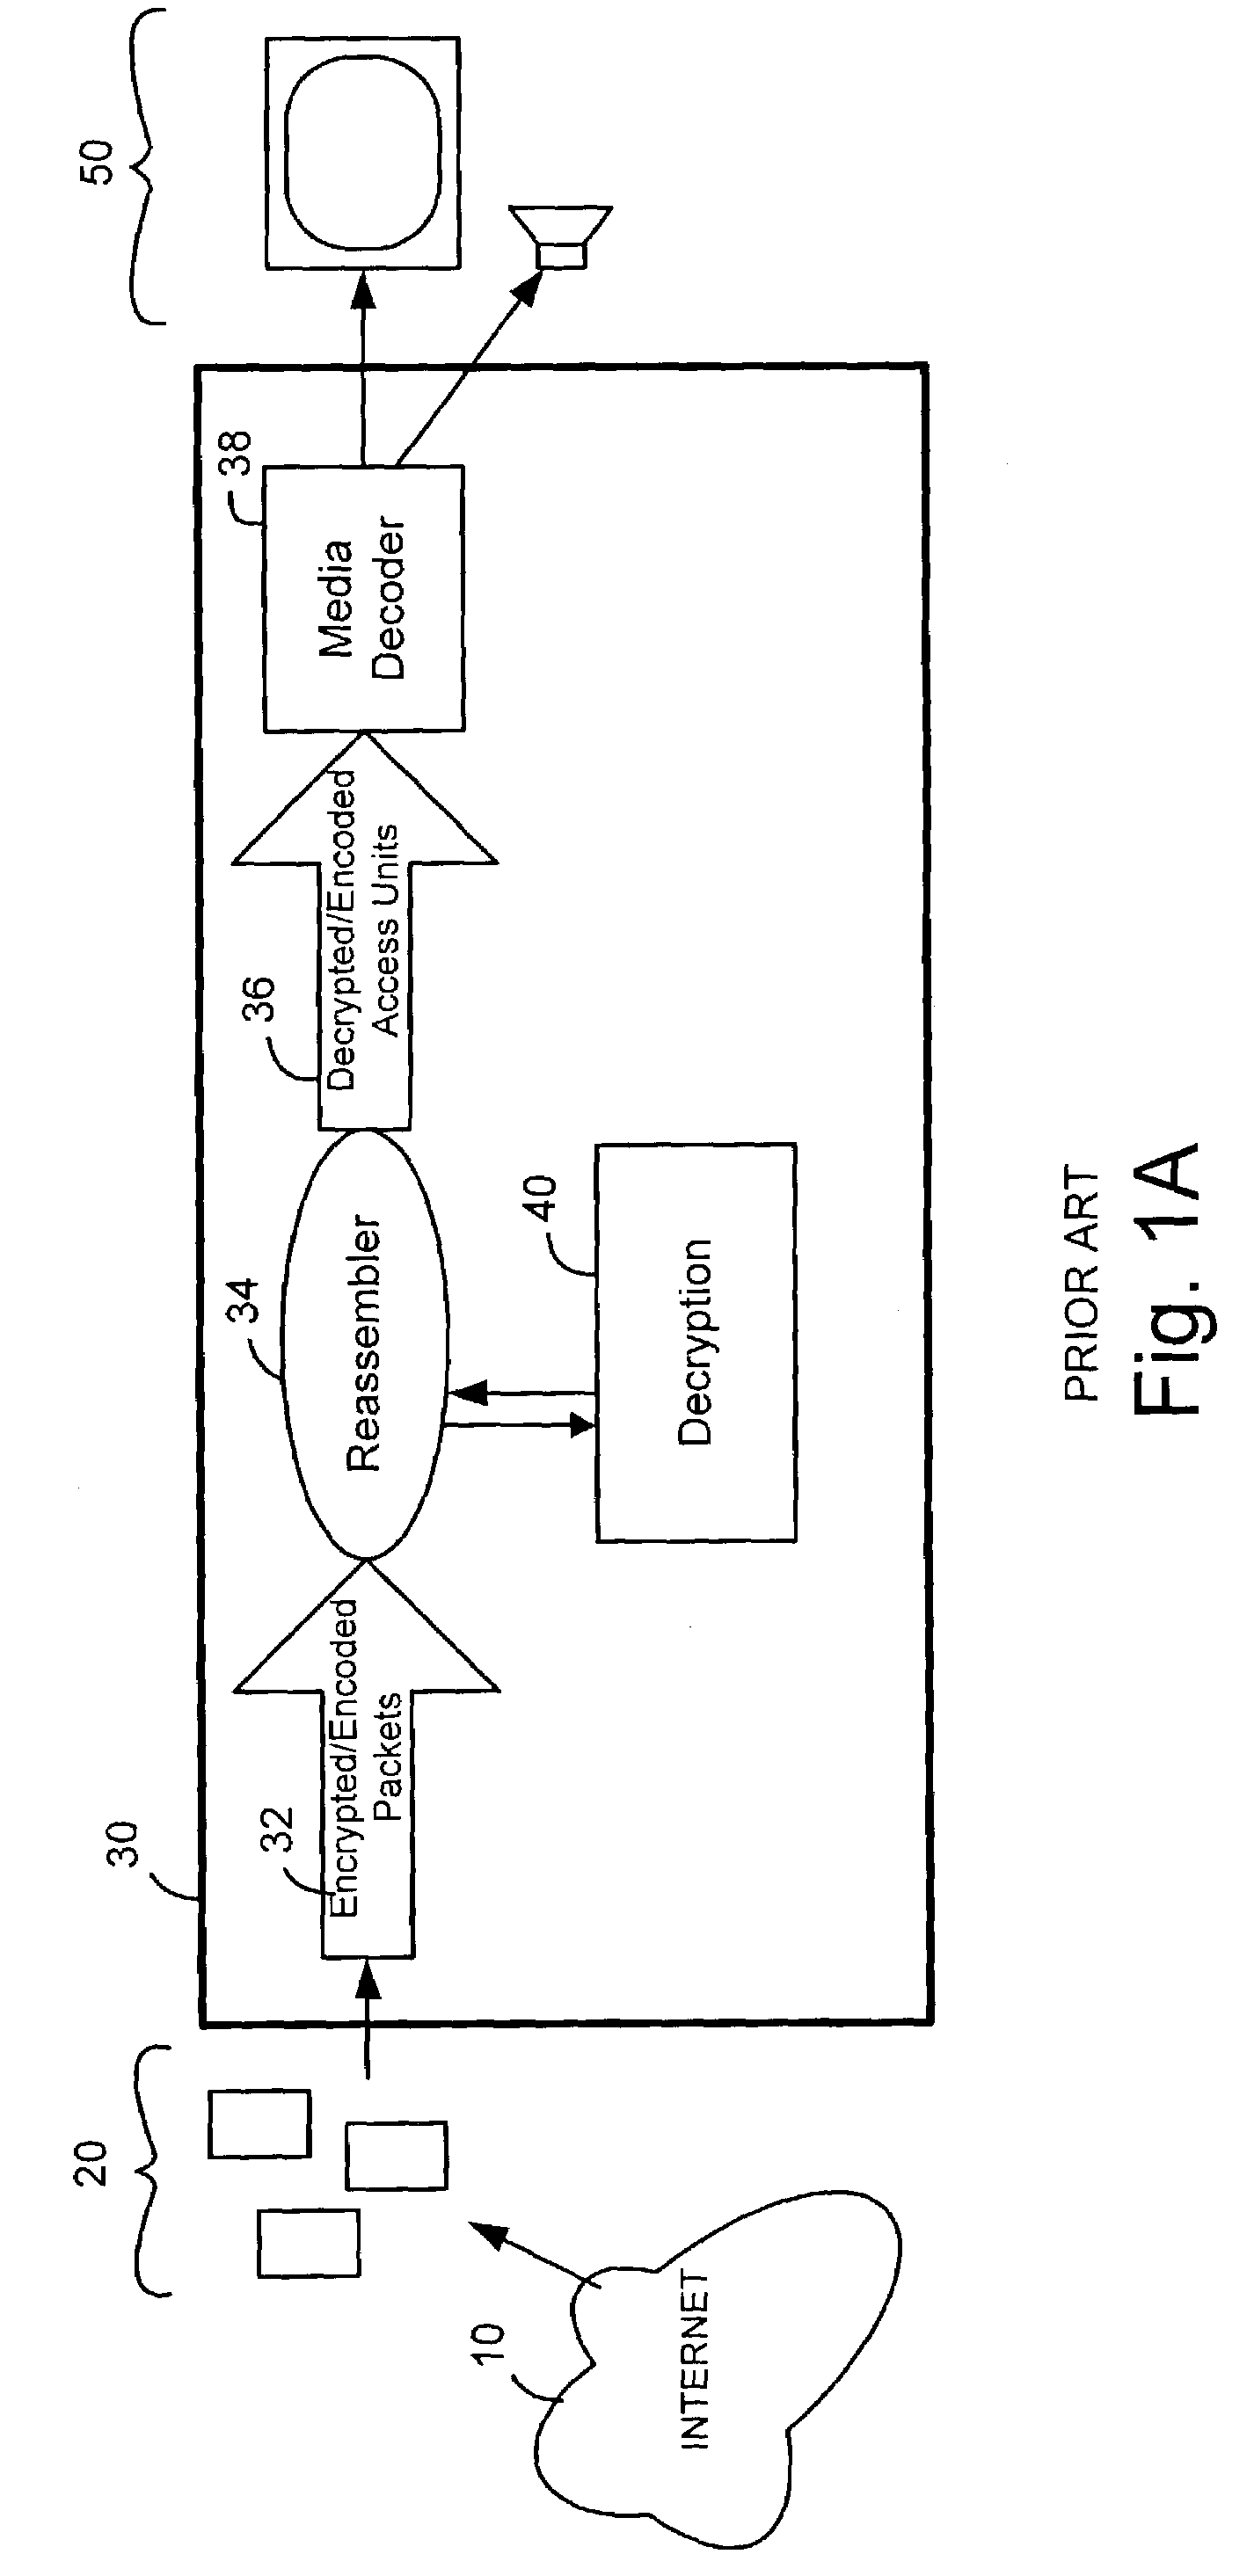 System for secure decryption of streaming media using selective decryption of header information and decryption of reassembled content